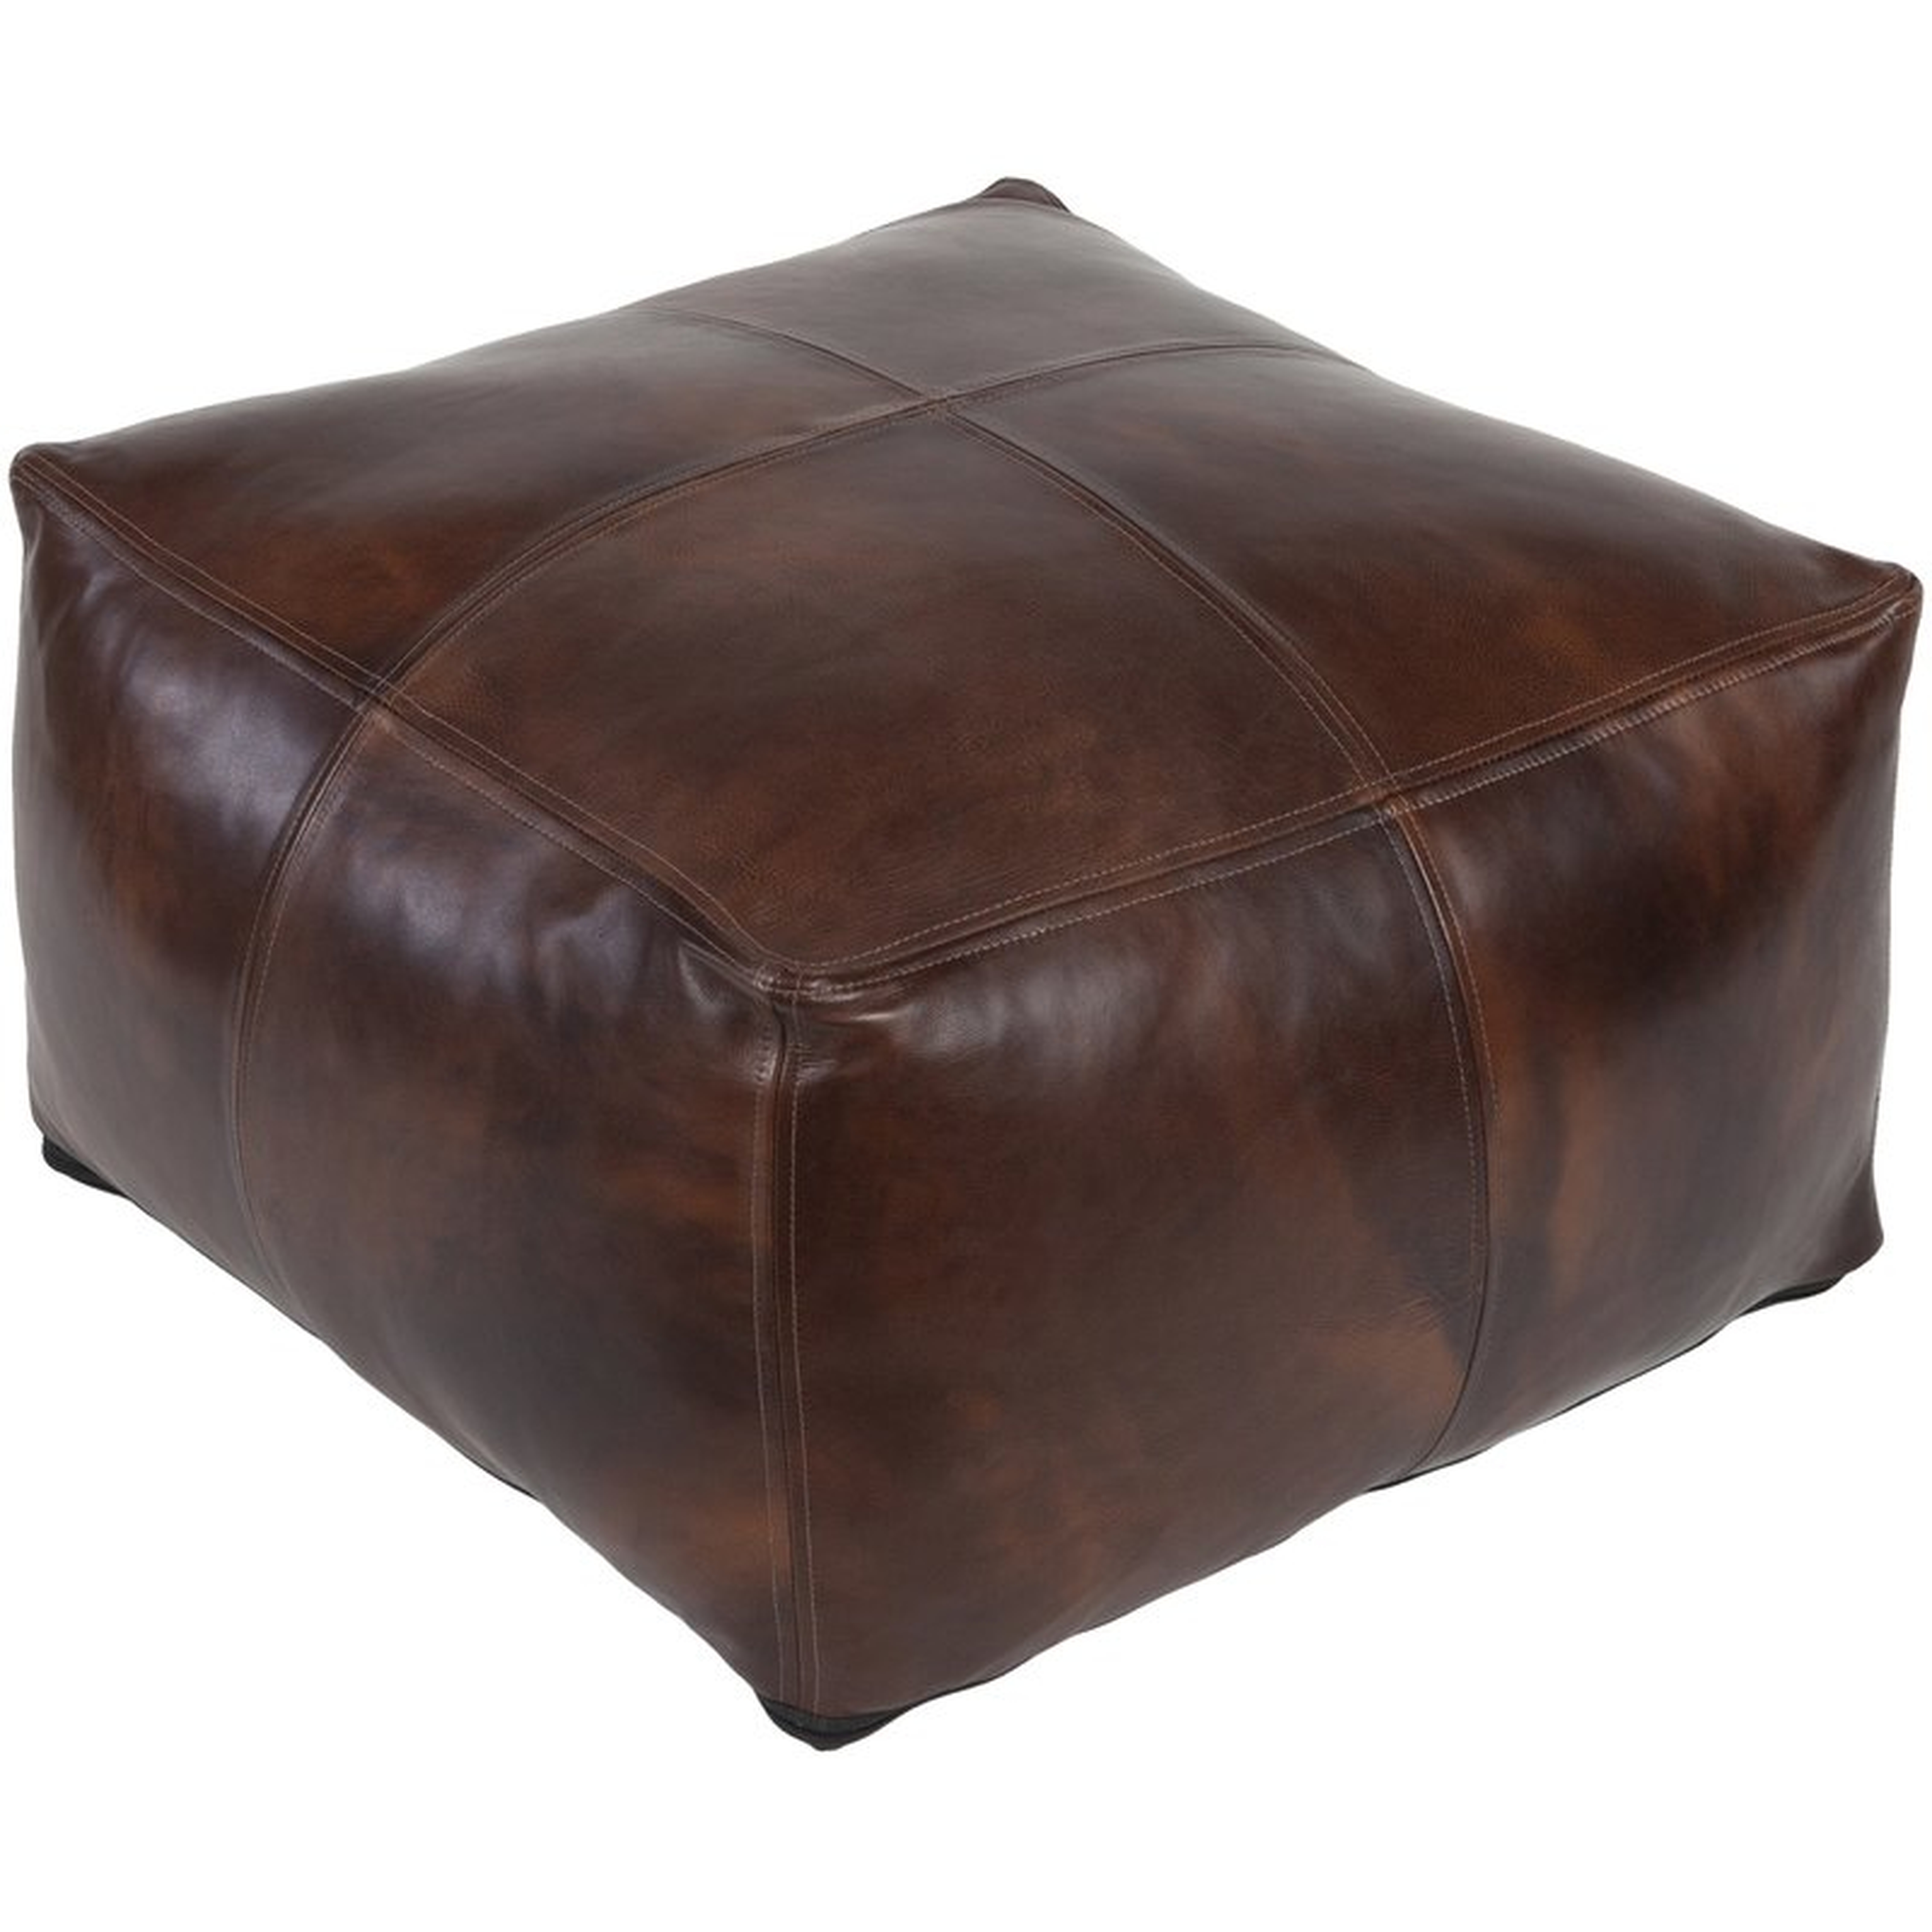 Brower Leather Pouf - AllModern